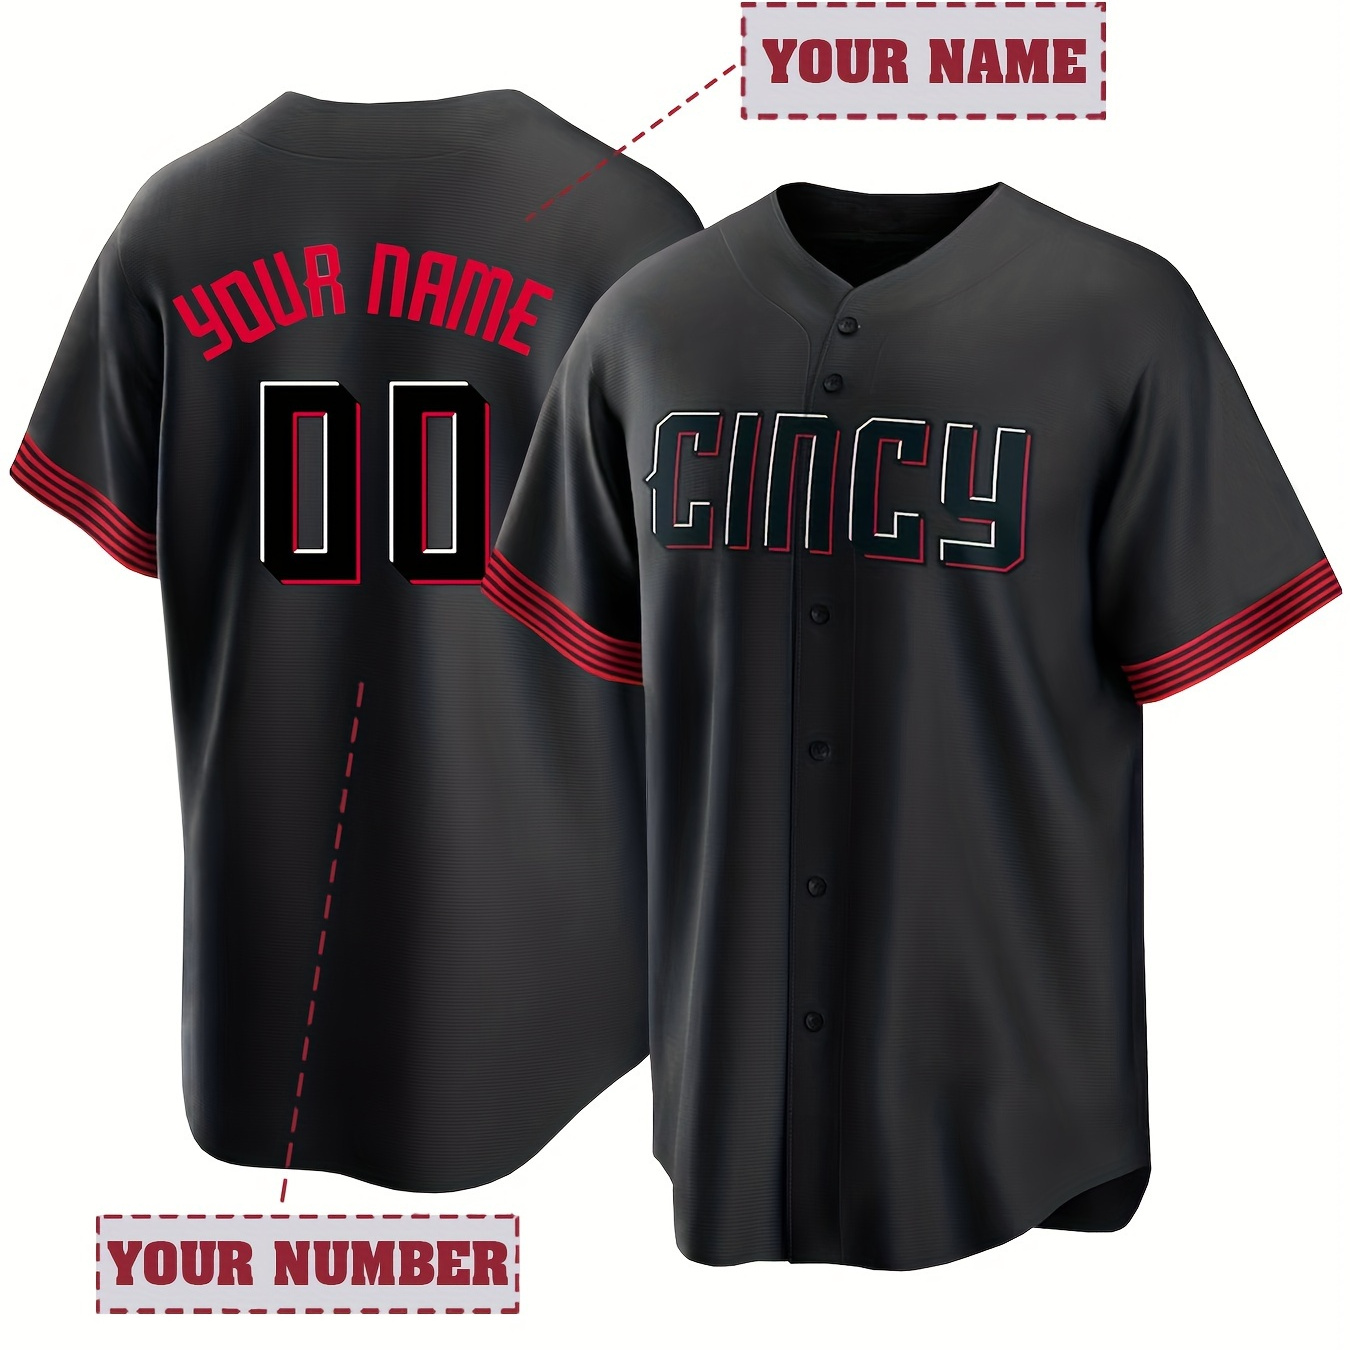 

Customized Personalized Name And Number Baseball Jersey For Men, Short Sleeve V-neck Button Down With Embroidery Design, Loose Fit Team Training Sports Shirt